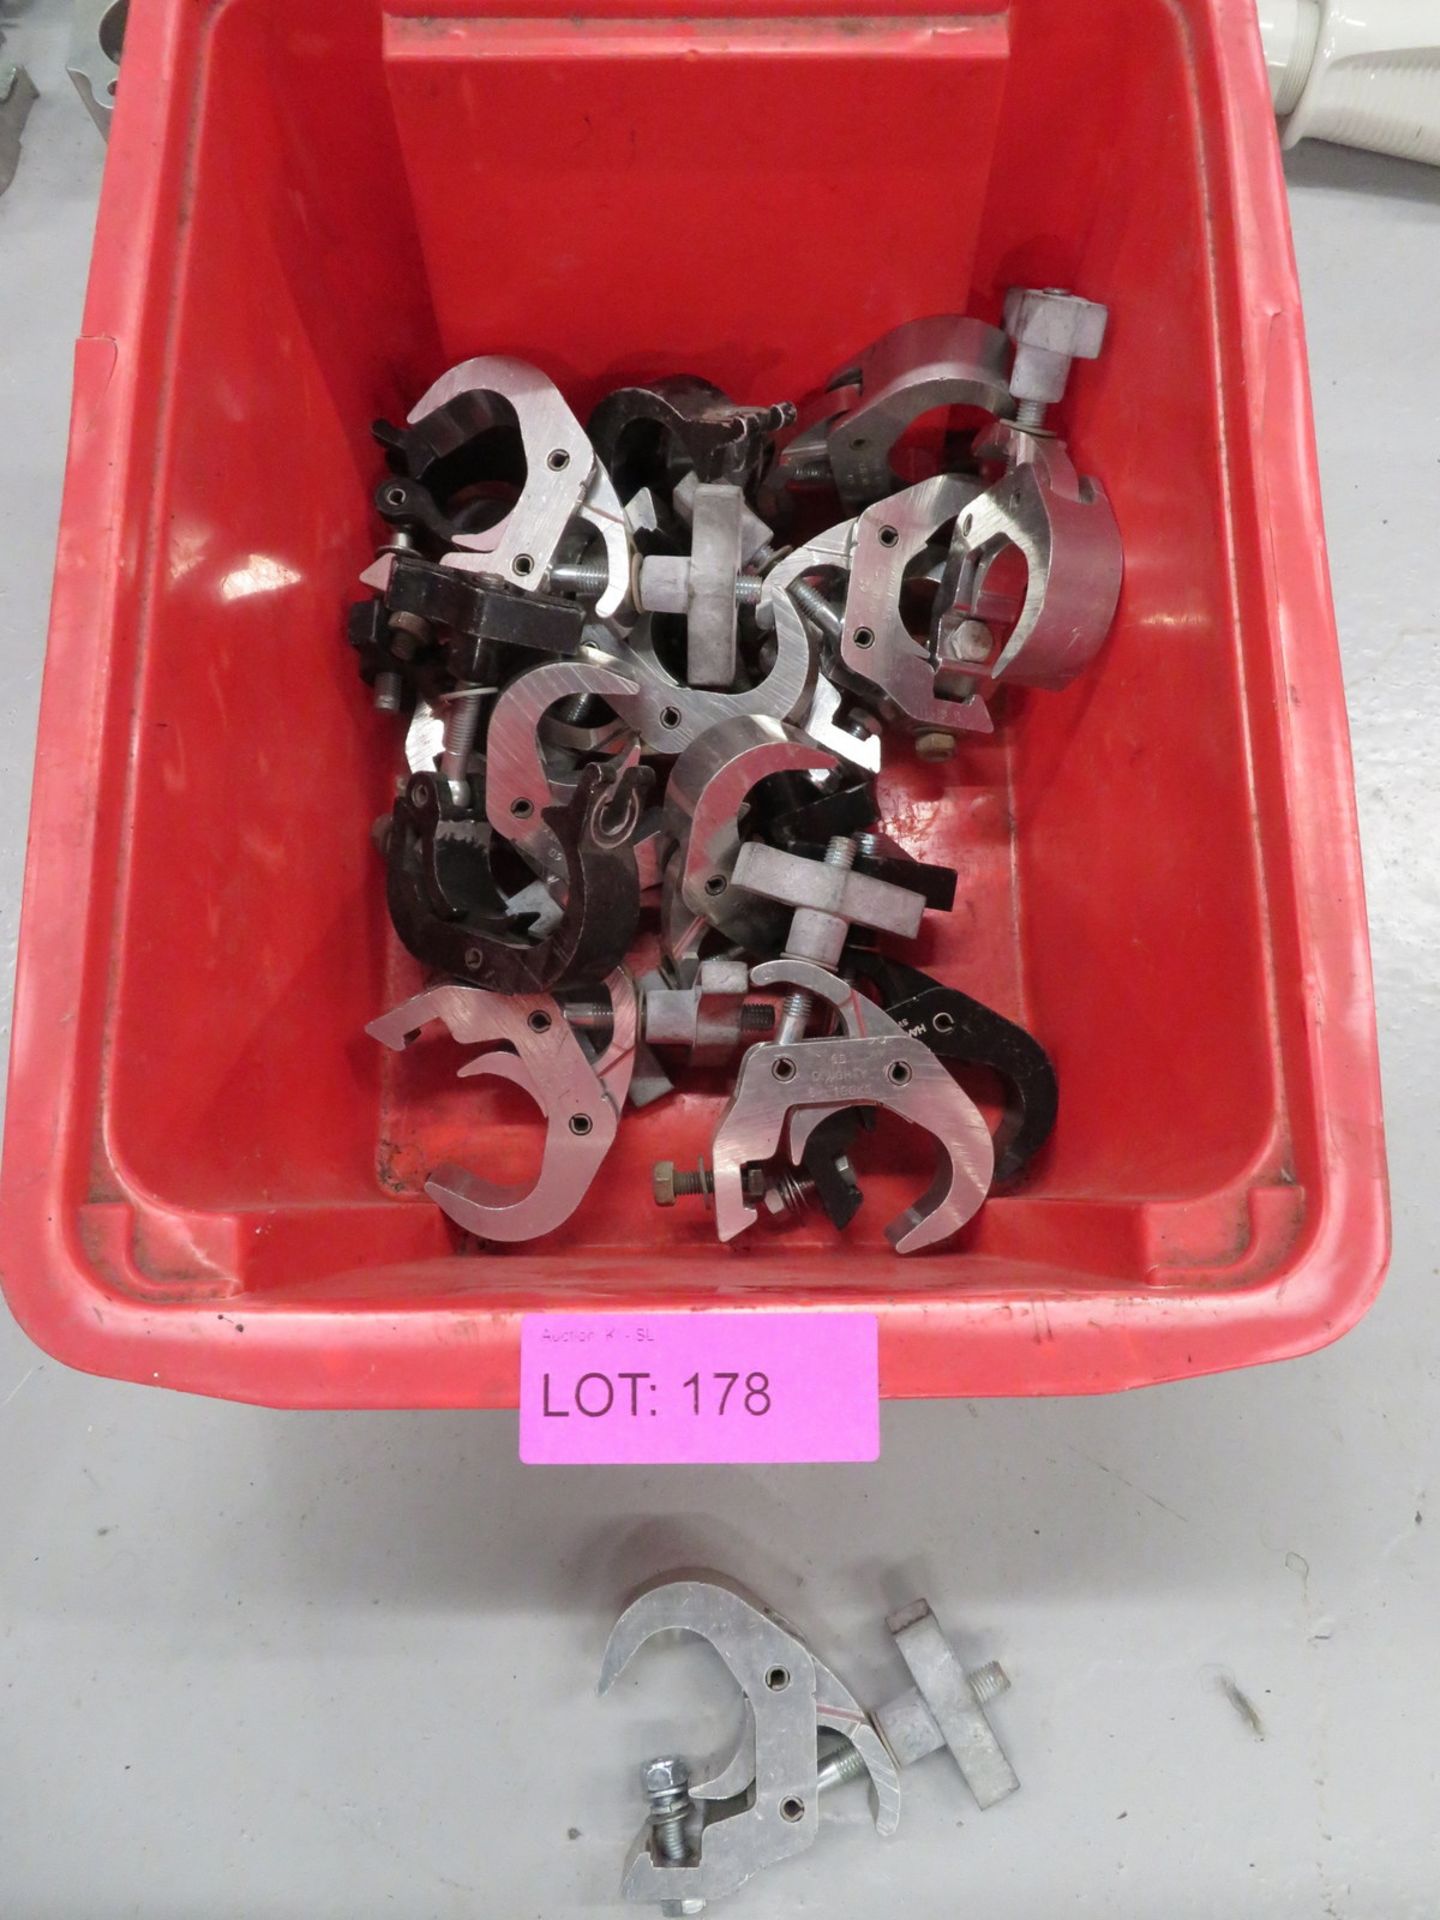 Box of silver and black quick clamps.